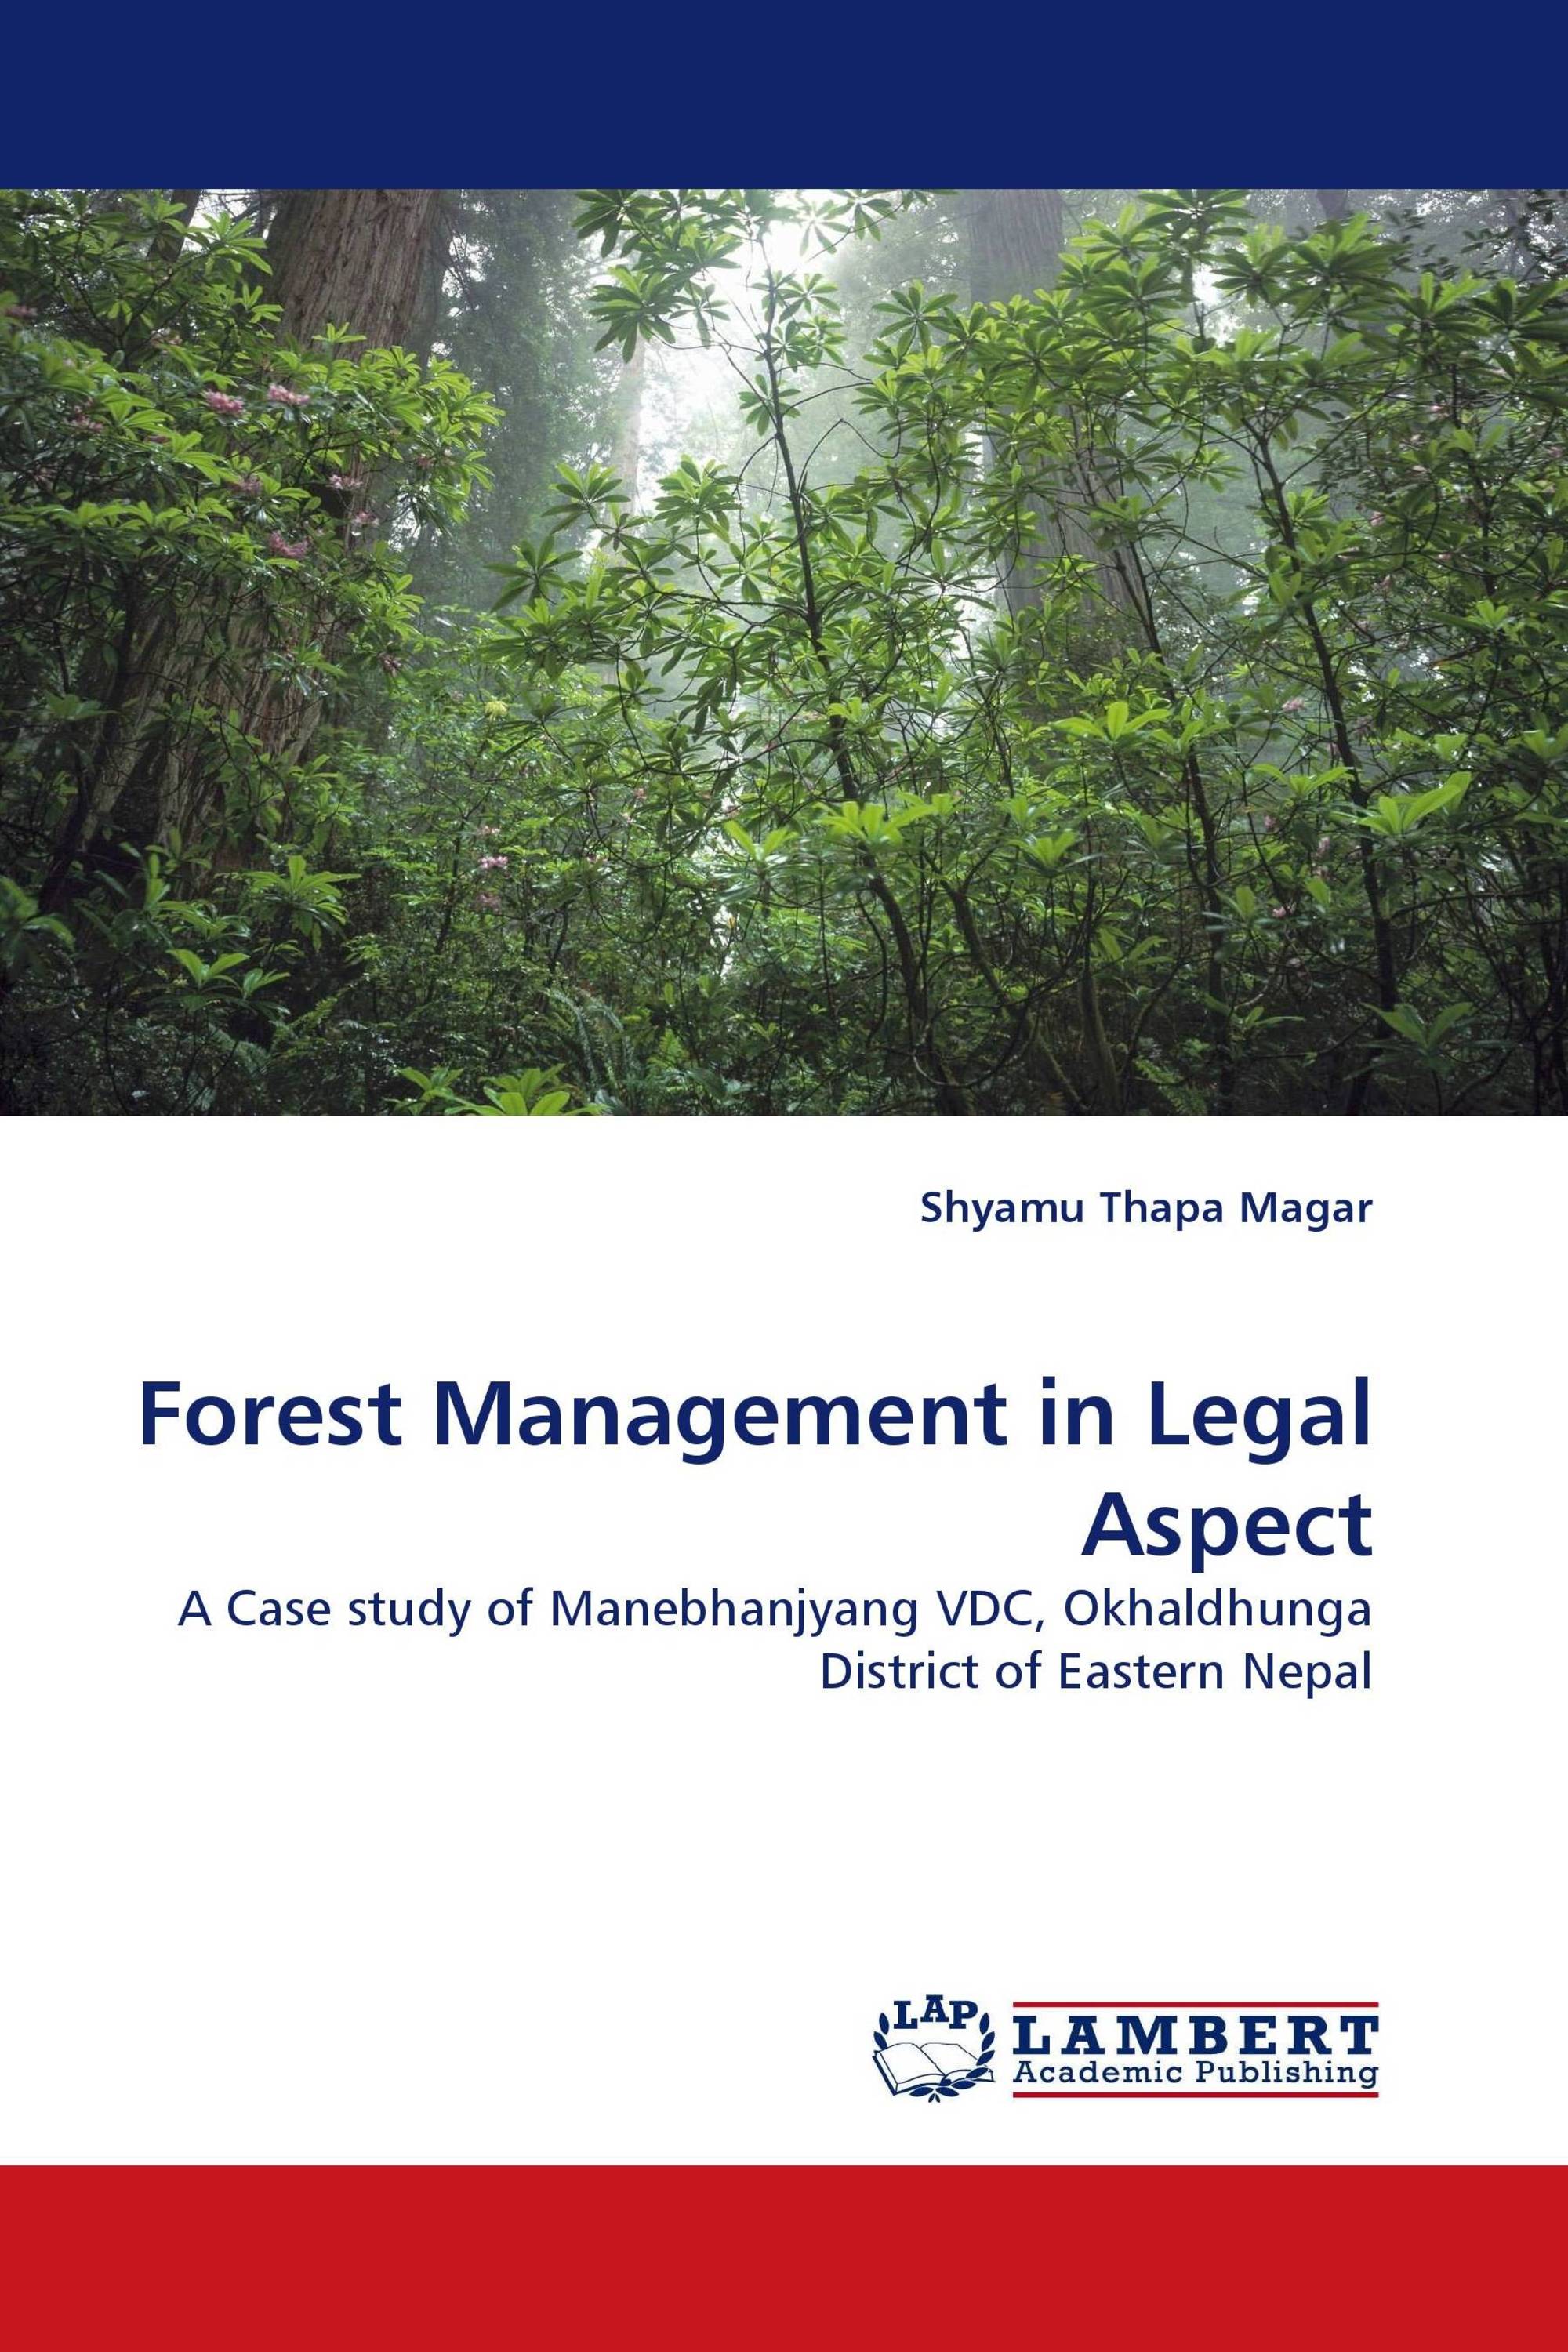 Forest Management in Legal Aspect